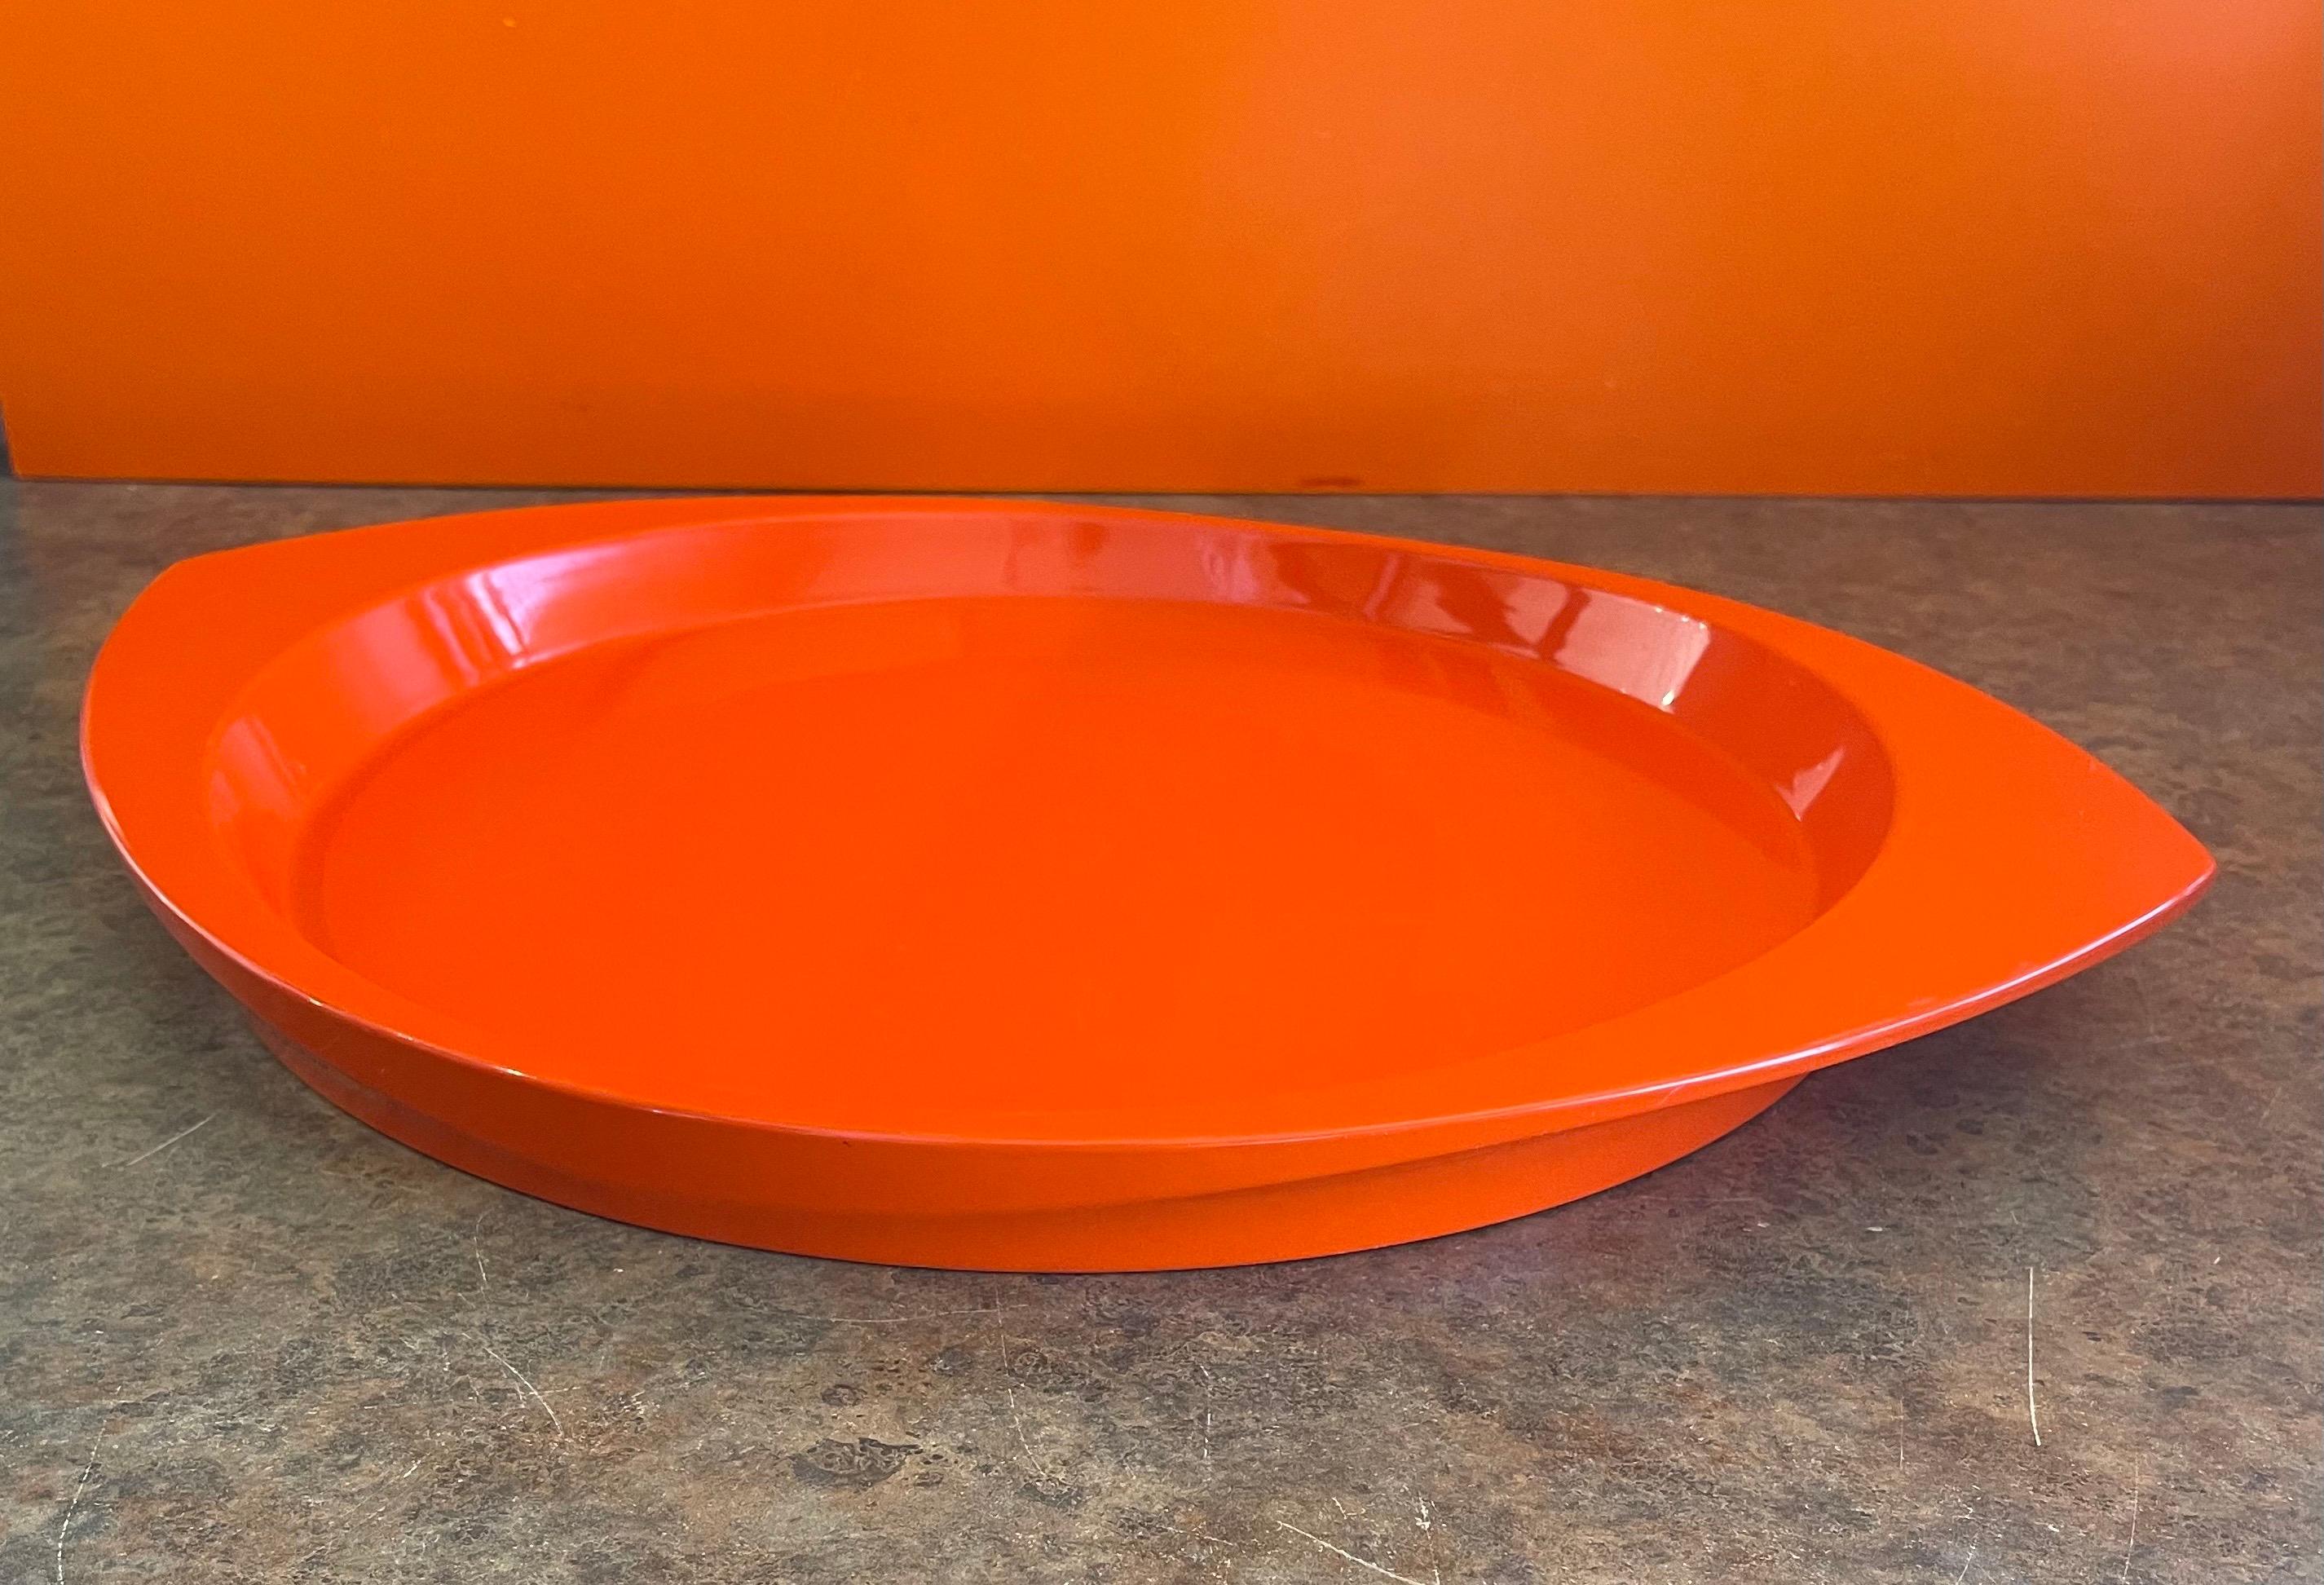 20th Century Large Oval Orange Lacquer Tray by Jens Quistgaard for Dansk, Early Production